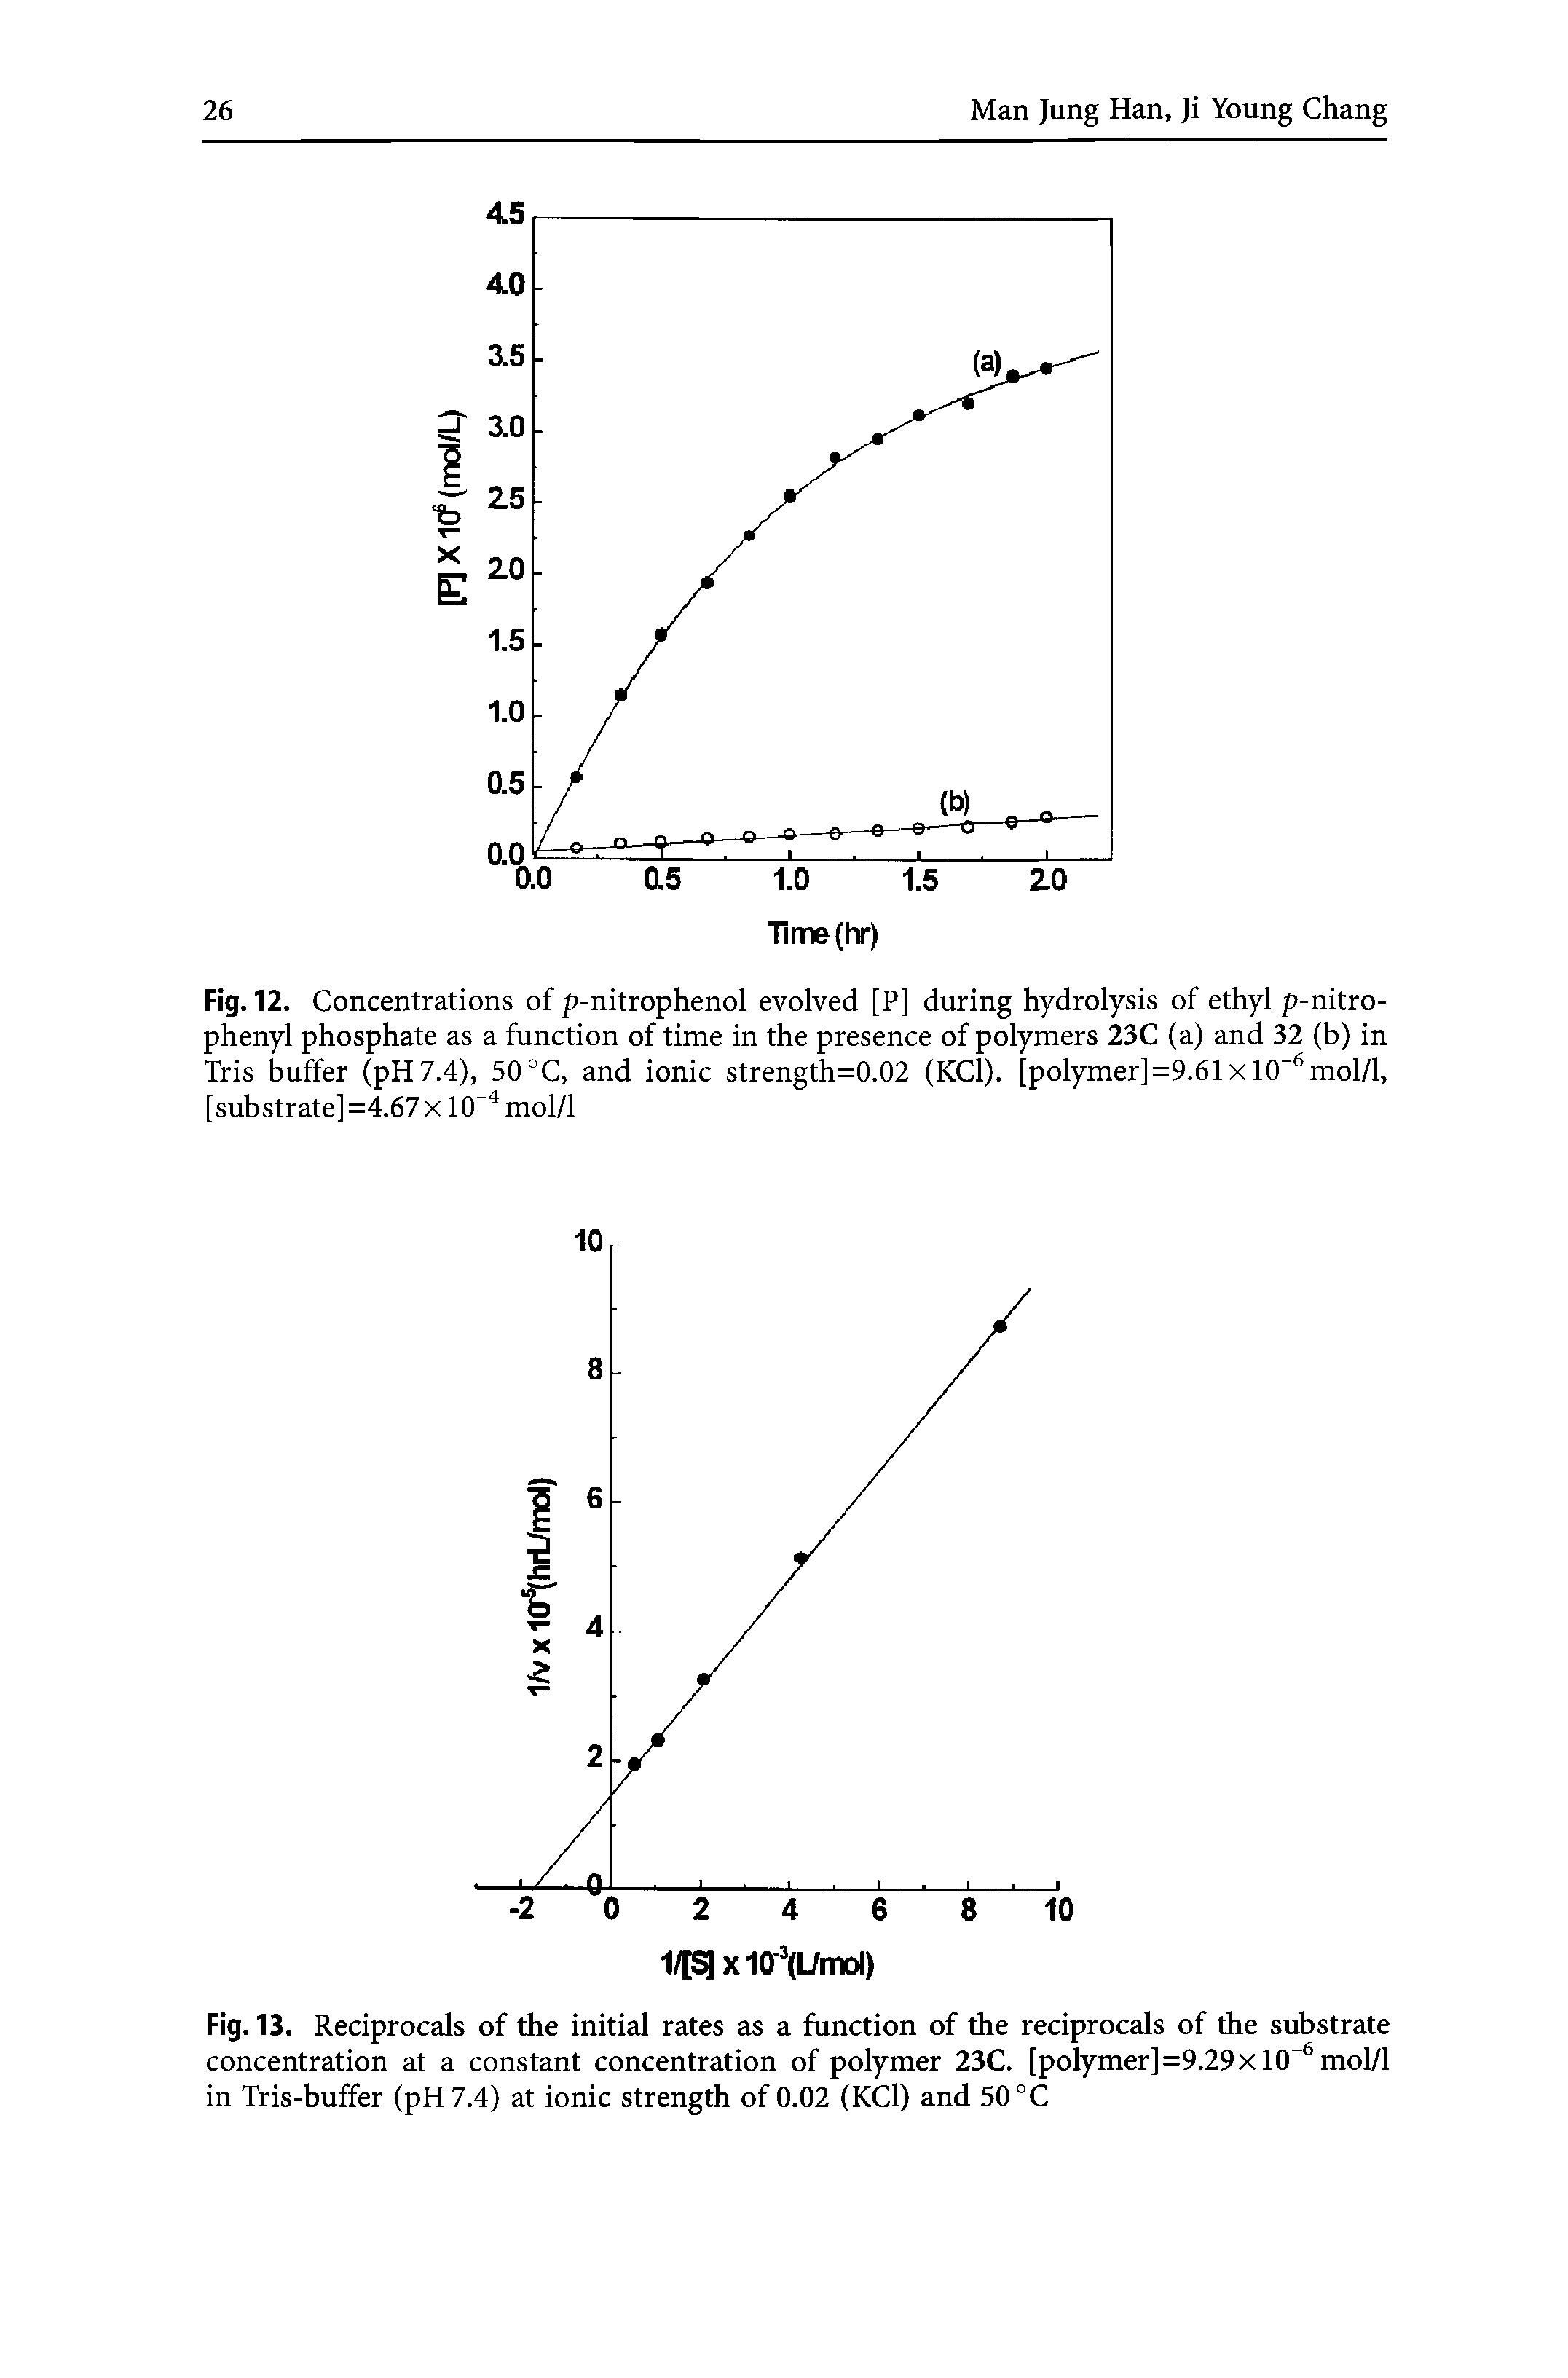 Fig. 12. Concentrations of p-nitrophenol evolved [P] during hydrolysis of ethyl p-nitro-phenyl phosphate as a function of time in the presence of polymers 23C (a) and 32 (b) in Tris buffer (pH 7.4), 50 °C, and ionic strength=0.02 (KCl). [polymer]=9.61xl0 mol/l, [substrate] =4.67x 10 " mol/1...